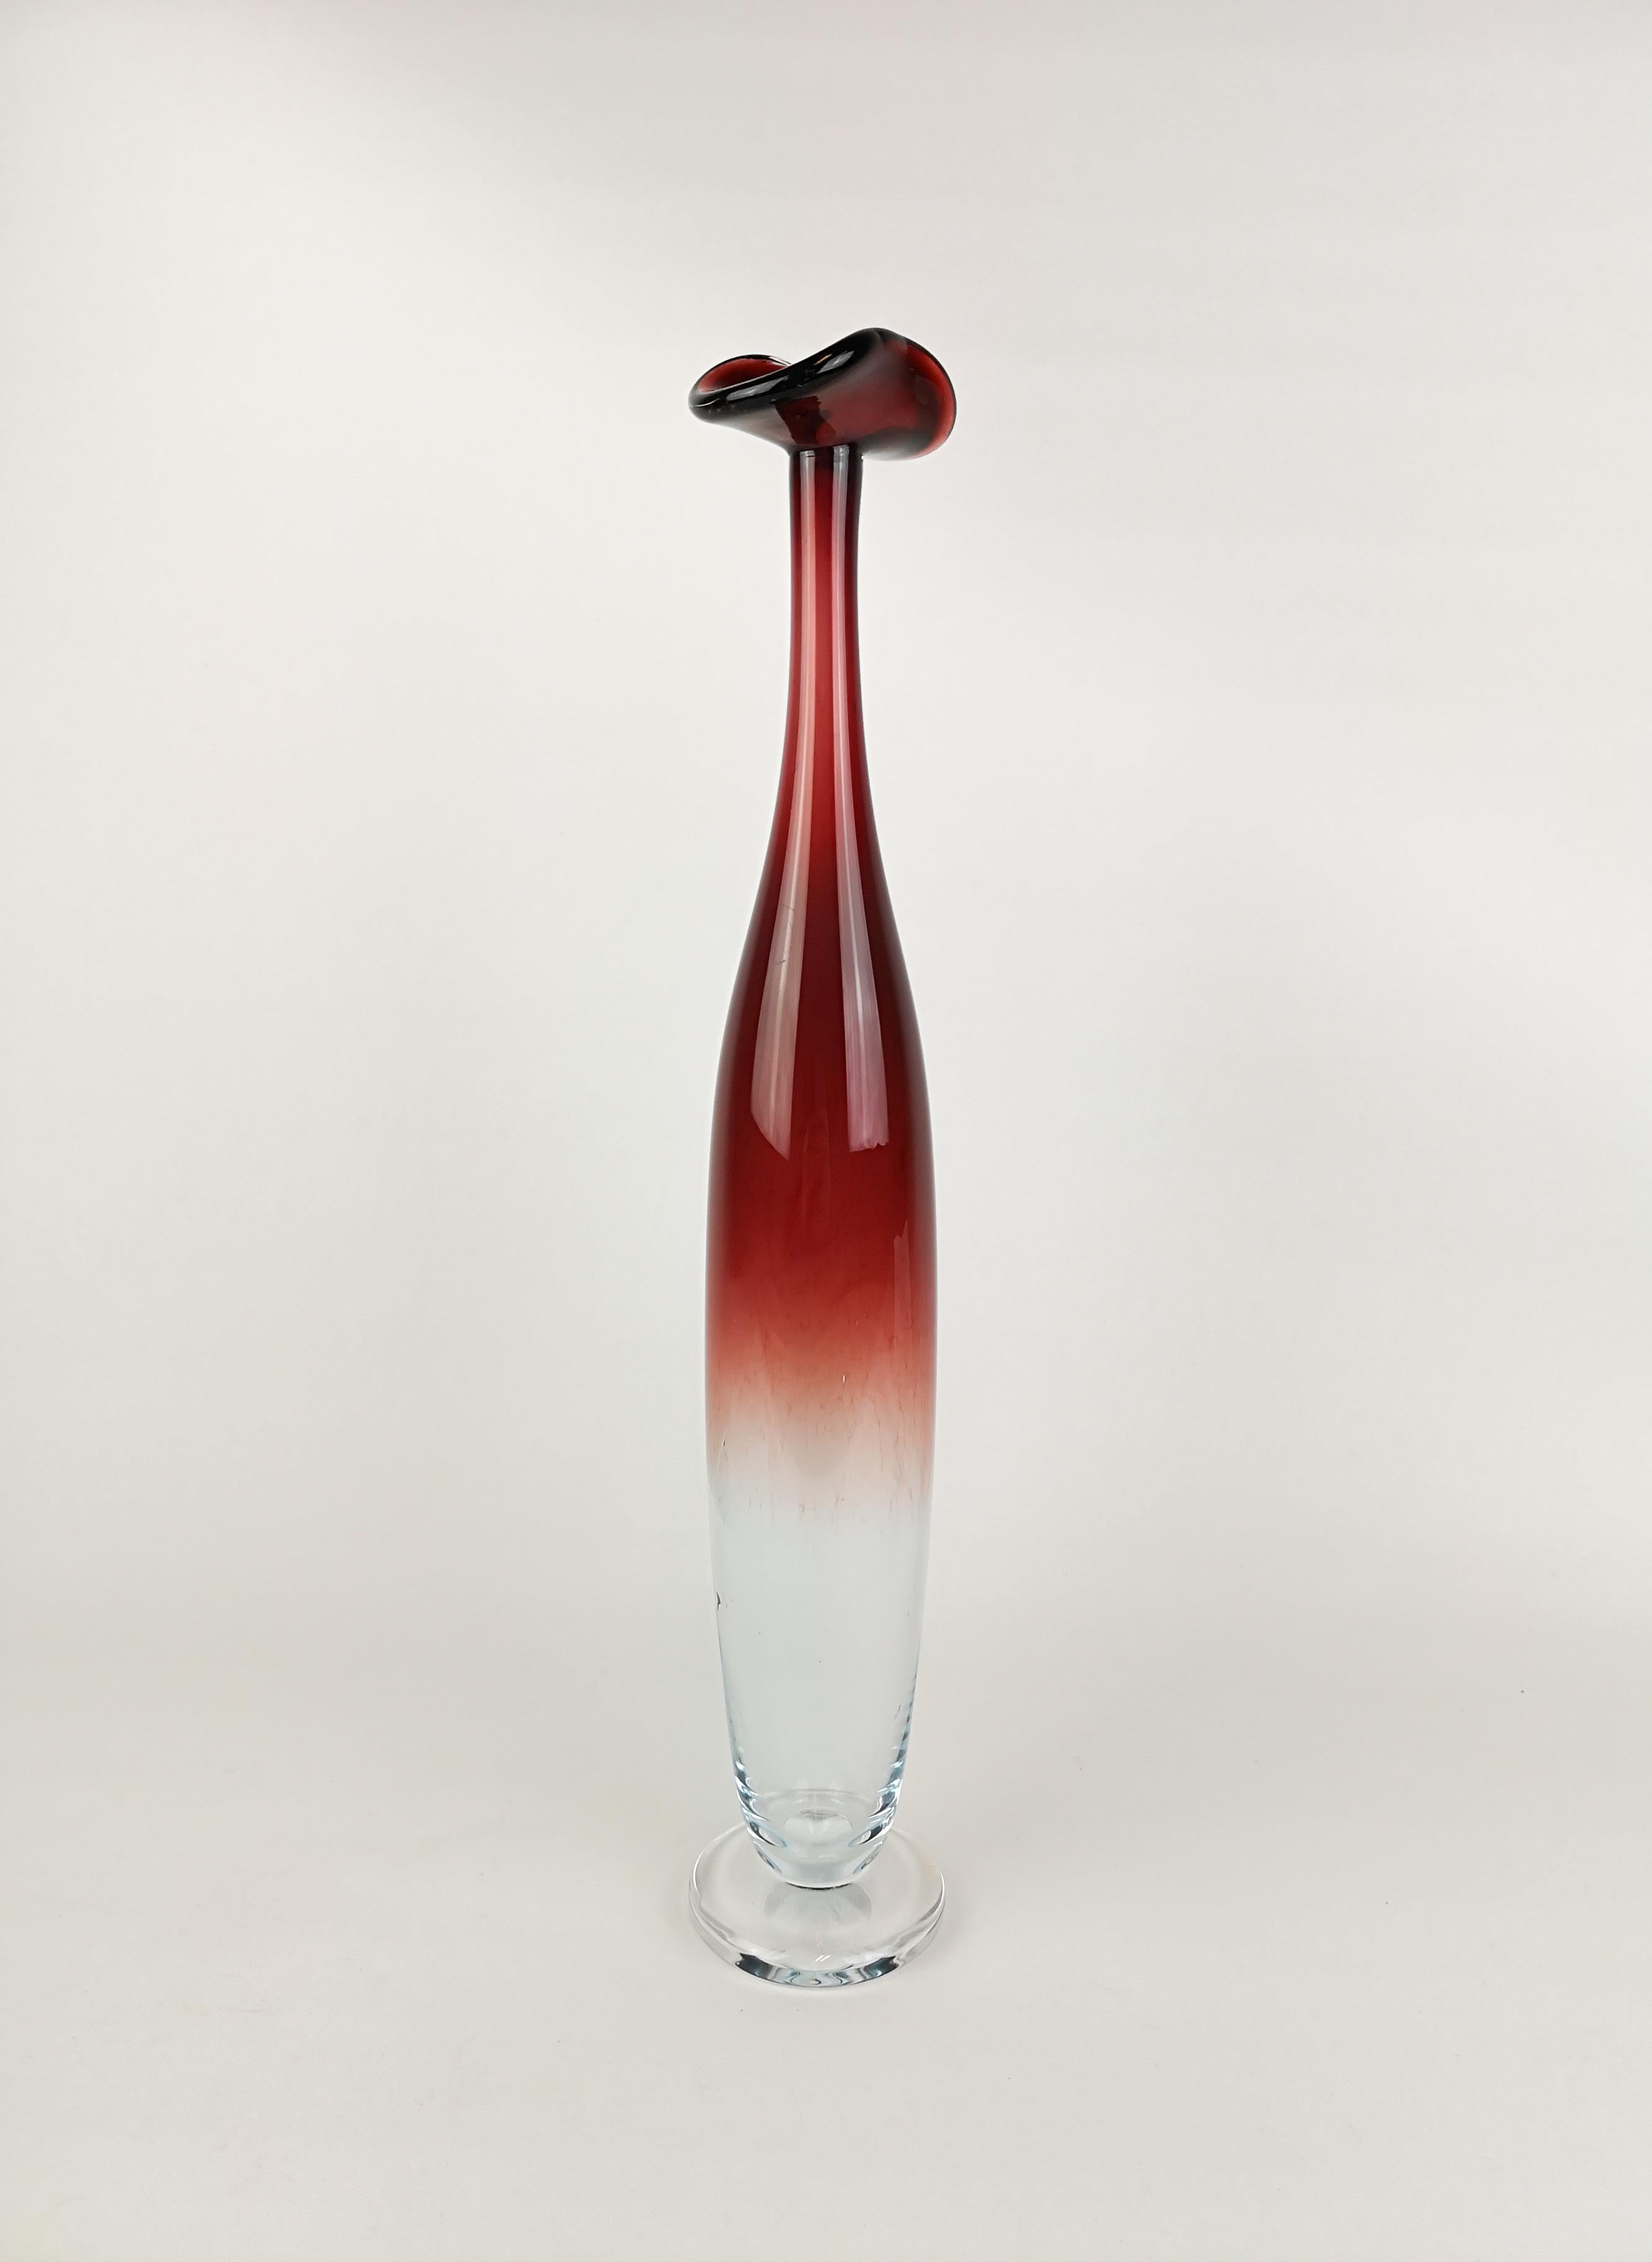 Orrefors Expo tall tulip vase designed by Nils Landberg. 
Wonderful glass with exceptional red color that collaborates with the clear glass. 
A beautiful top on this vase. Its in very good condition. 

Measures: 38 cm. Signed Orrefors Expo